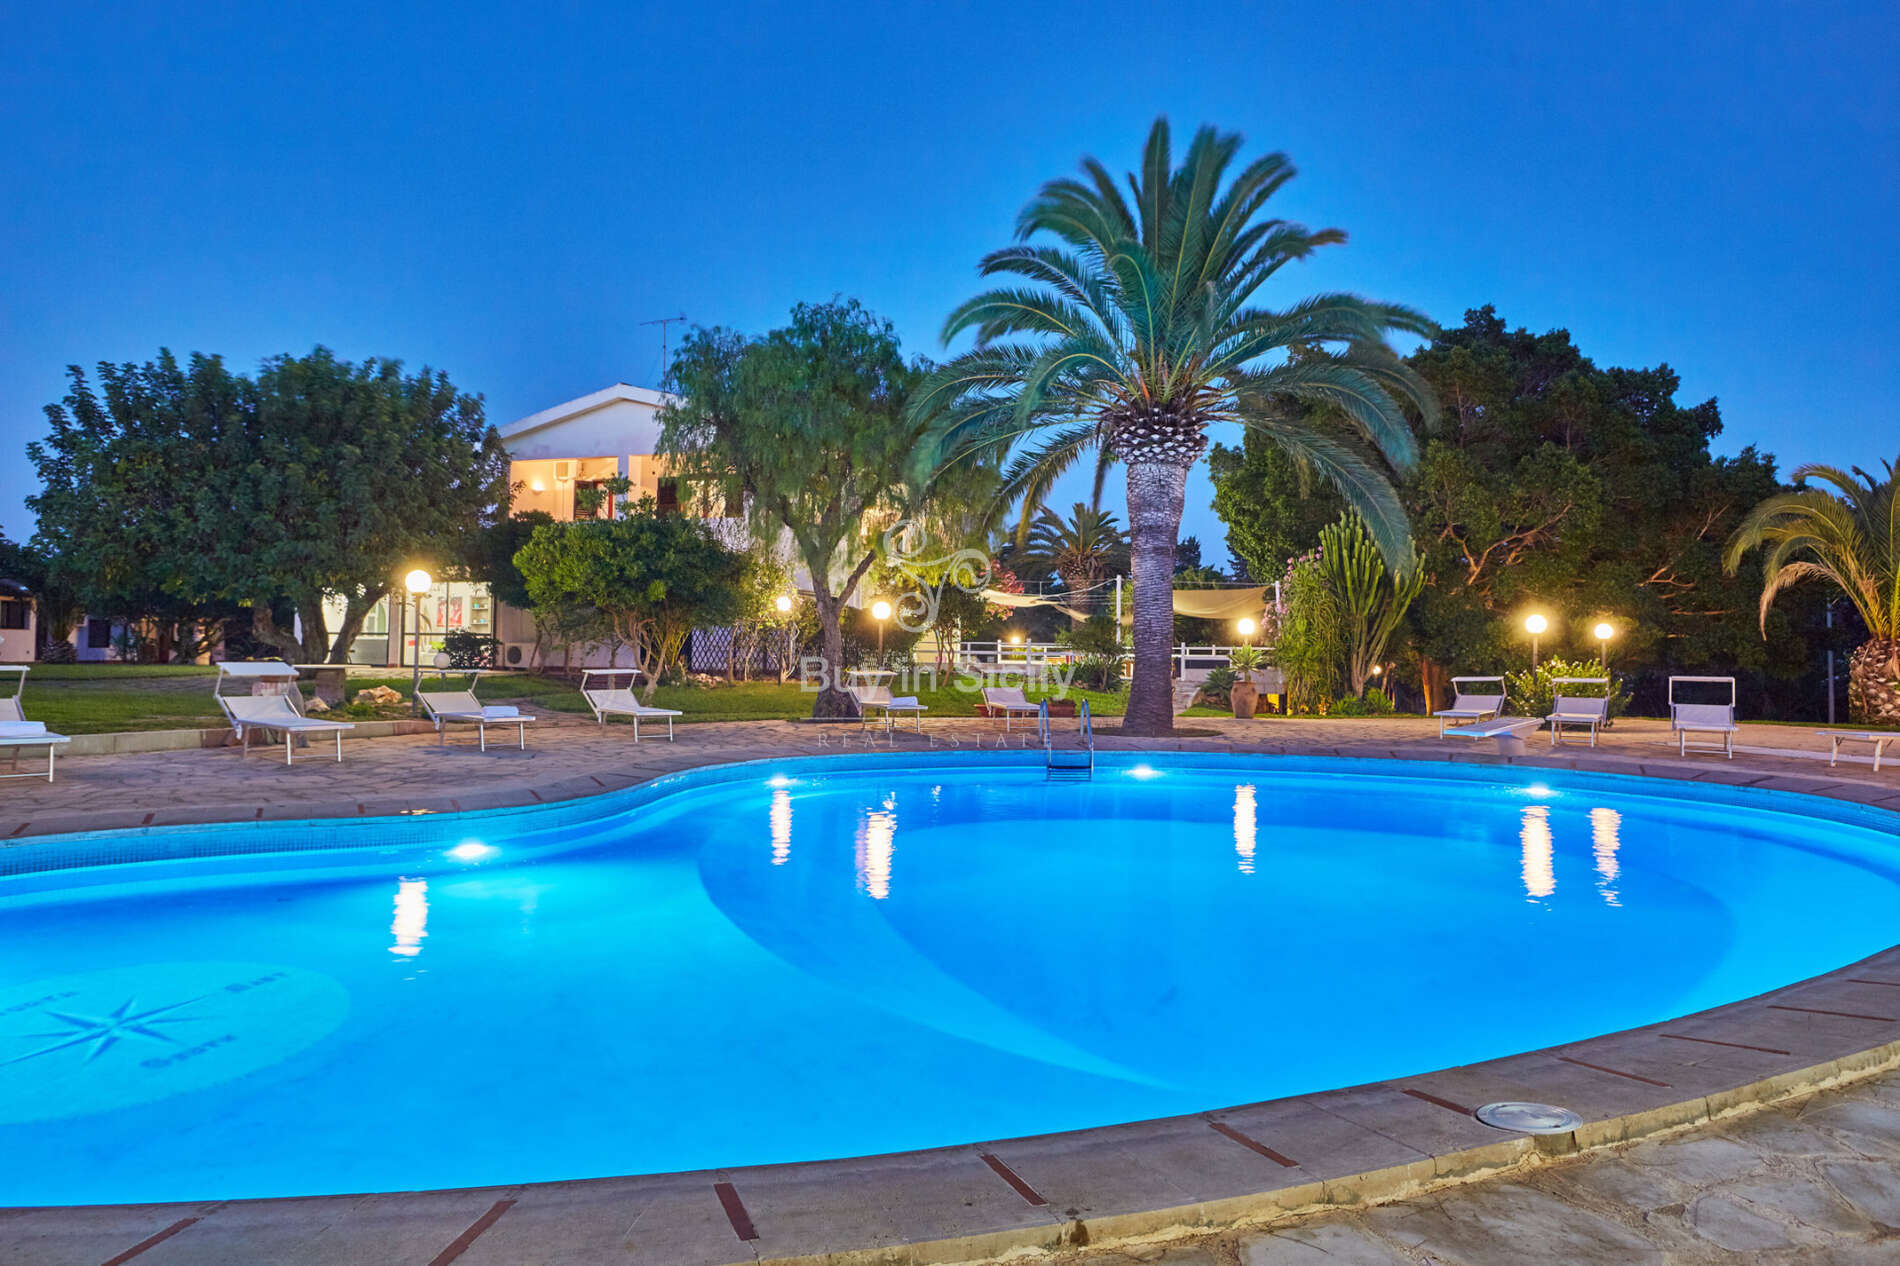 Spectacular villa with a pool, nestled in a marvelous park, located just 300m from the beach